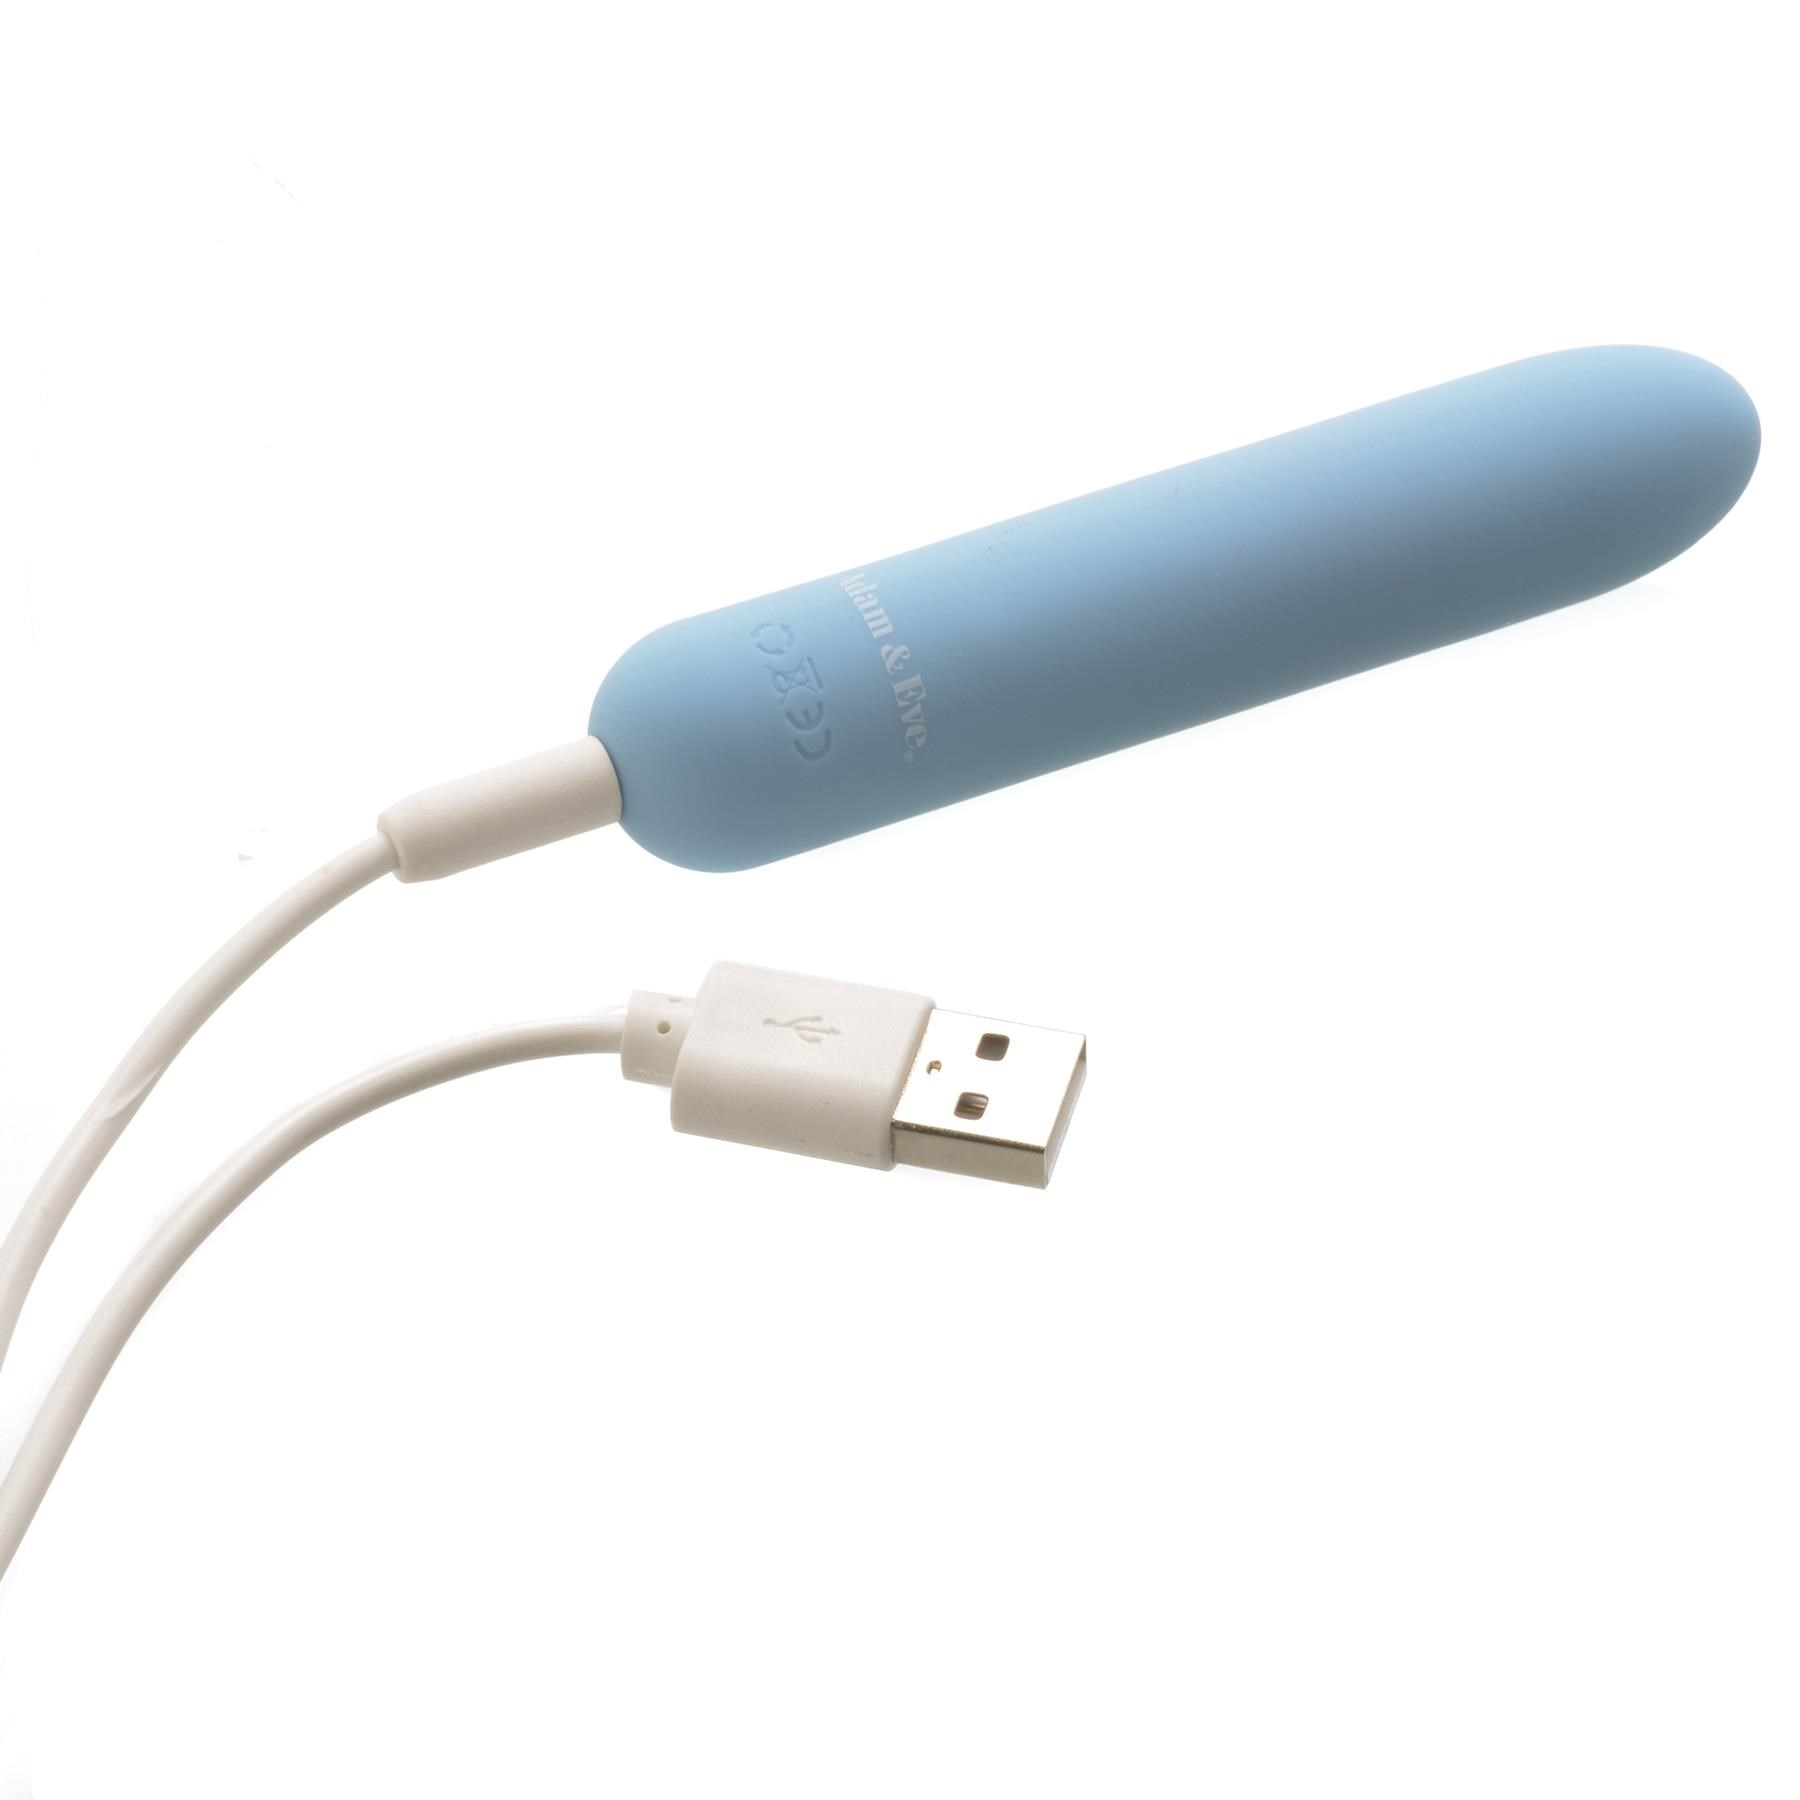 Eve's Silky Sensations Rechargeable Bullet Showing Where Charger is Inserted